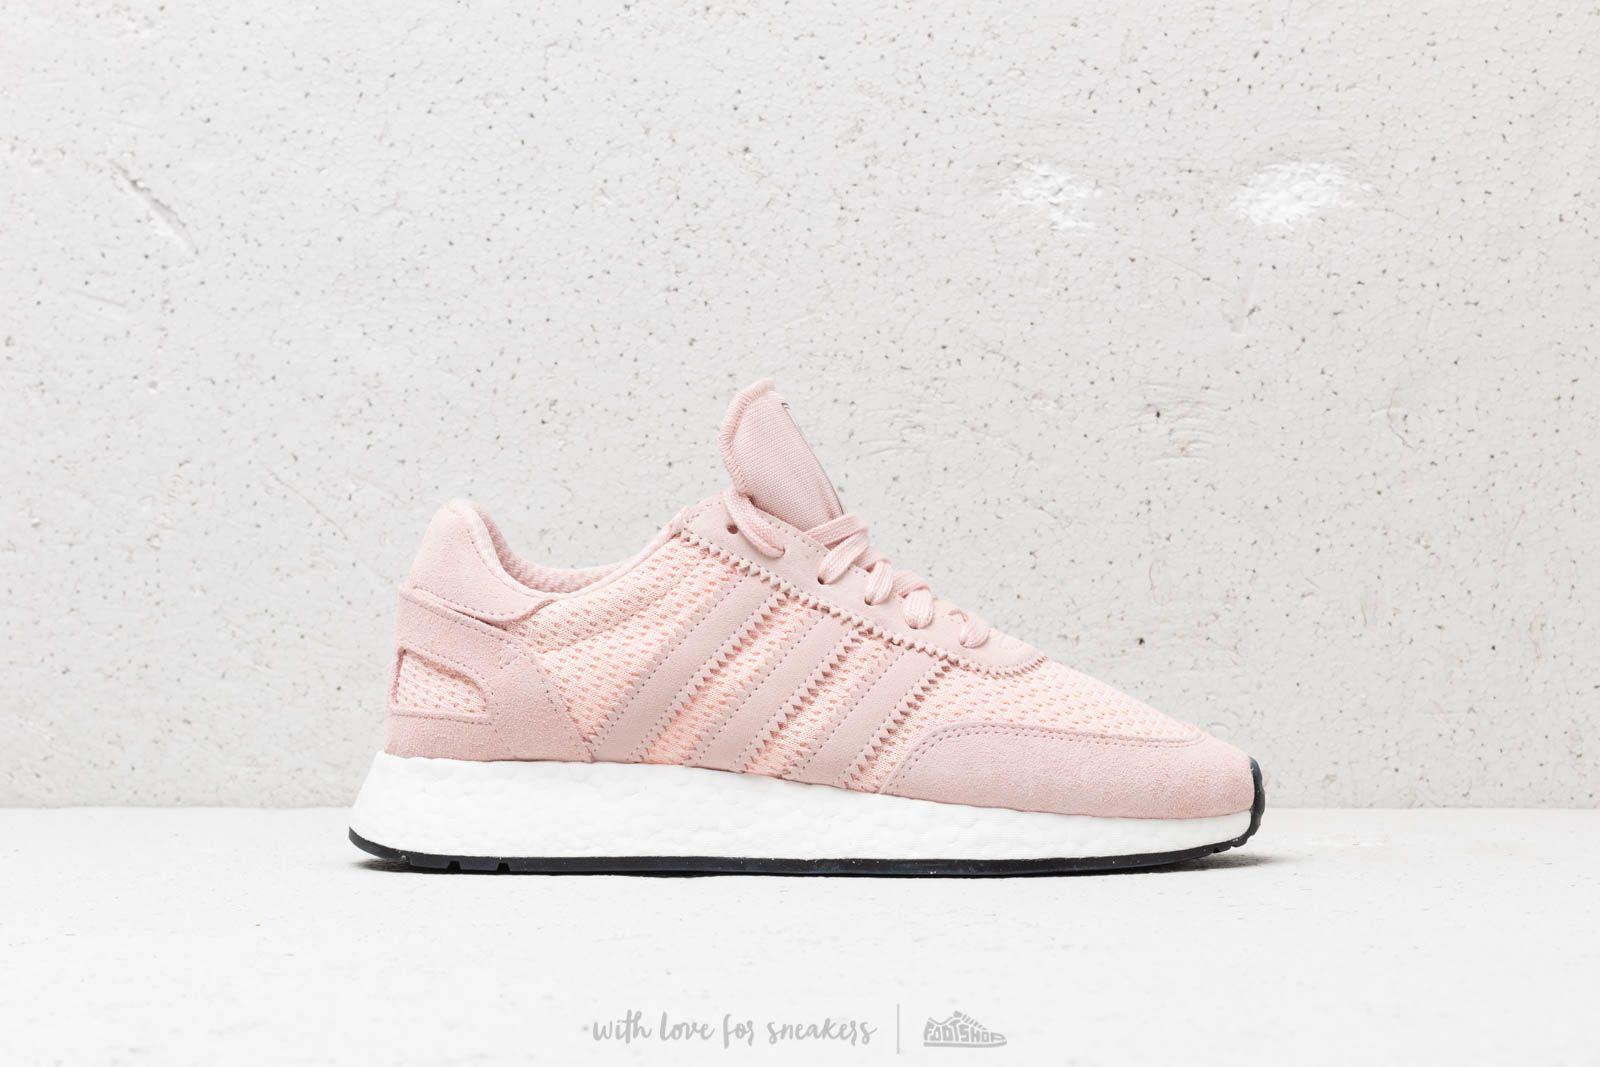 adidas Originals Rubber Adidas I-5923 Icey Pink/ Icey Pink/ Core Black for  Men - Lyst